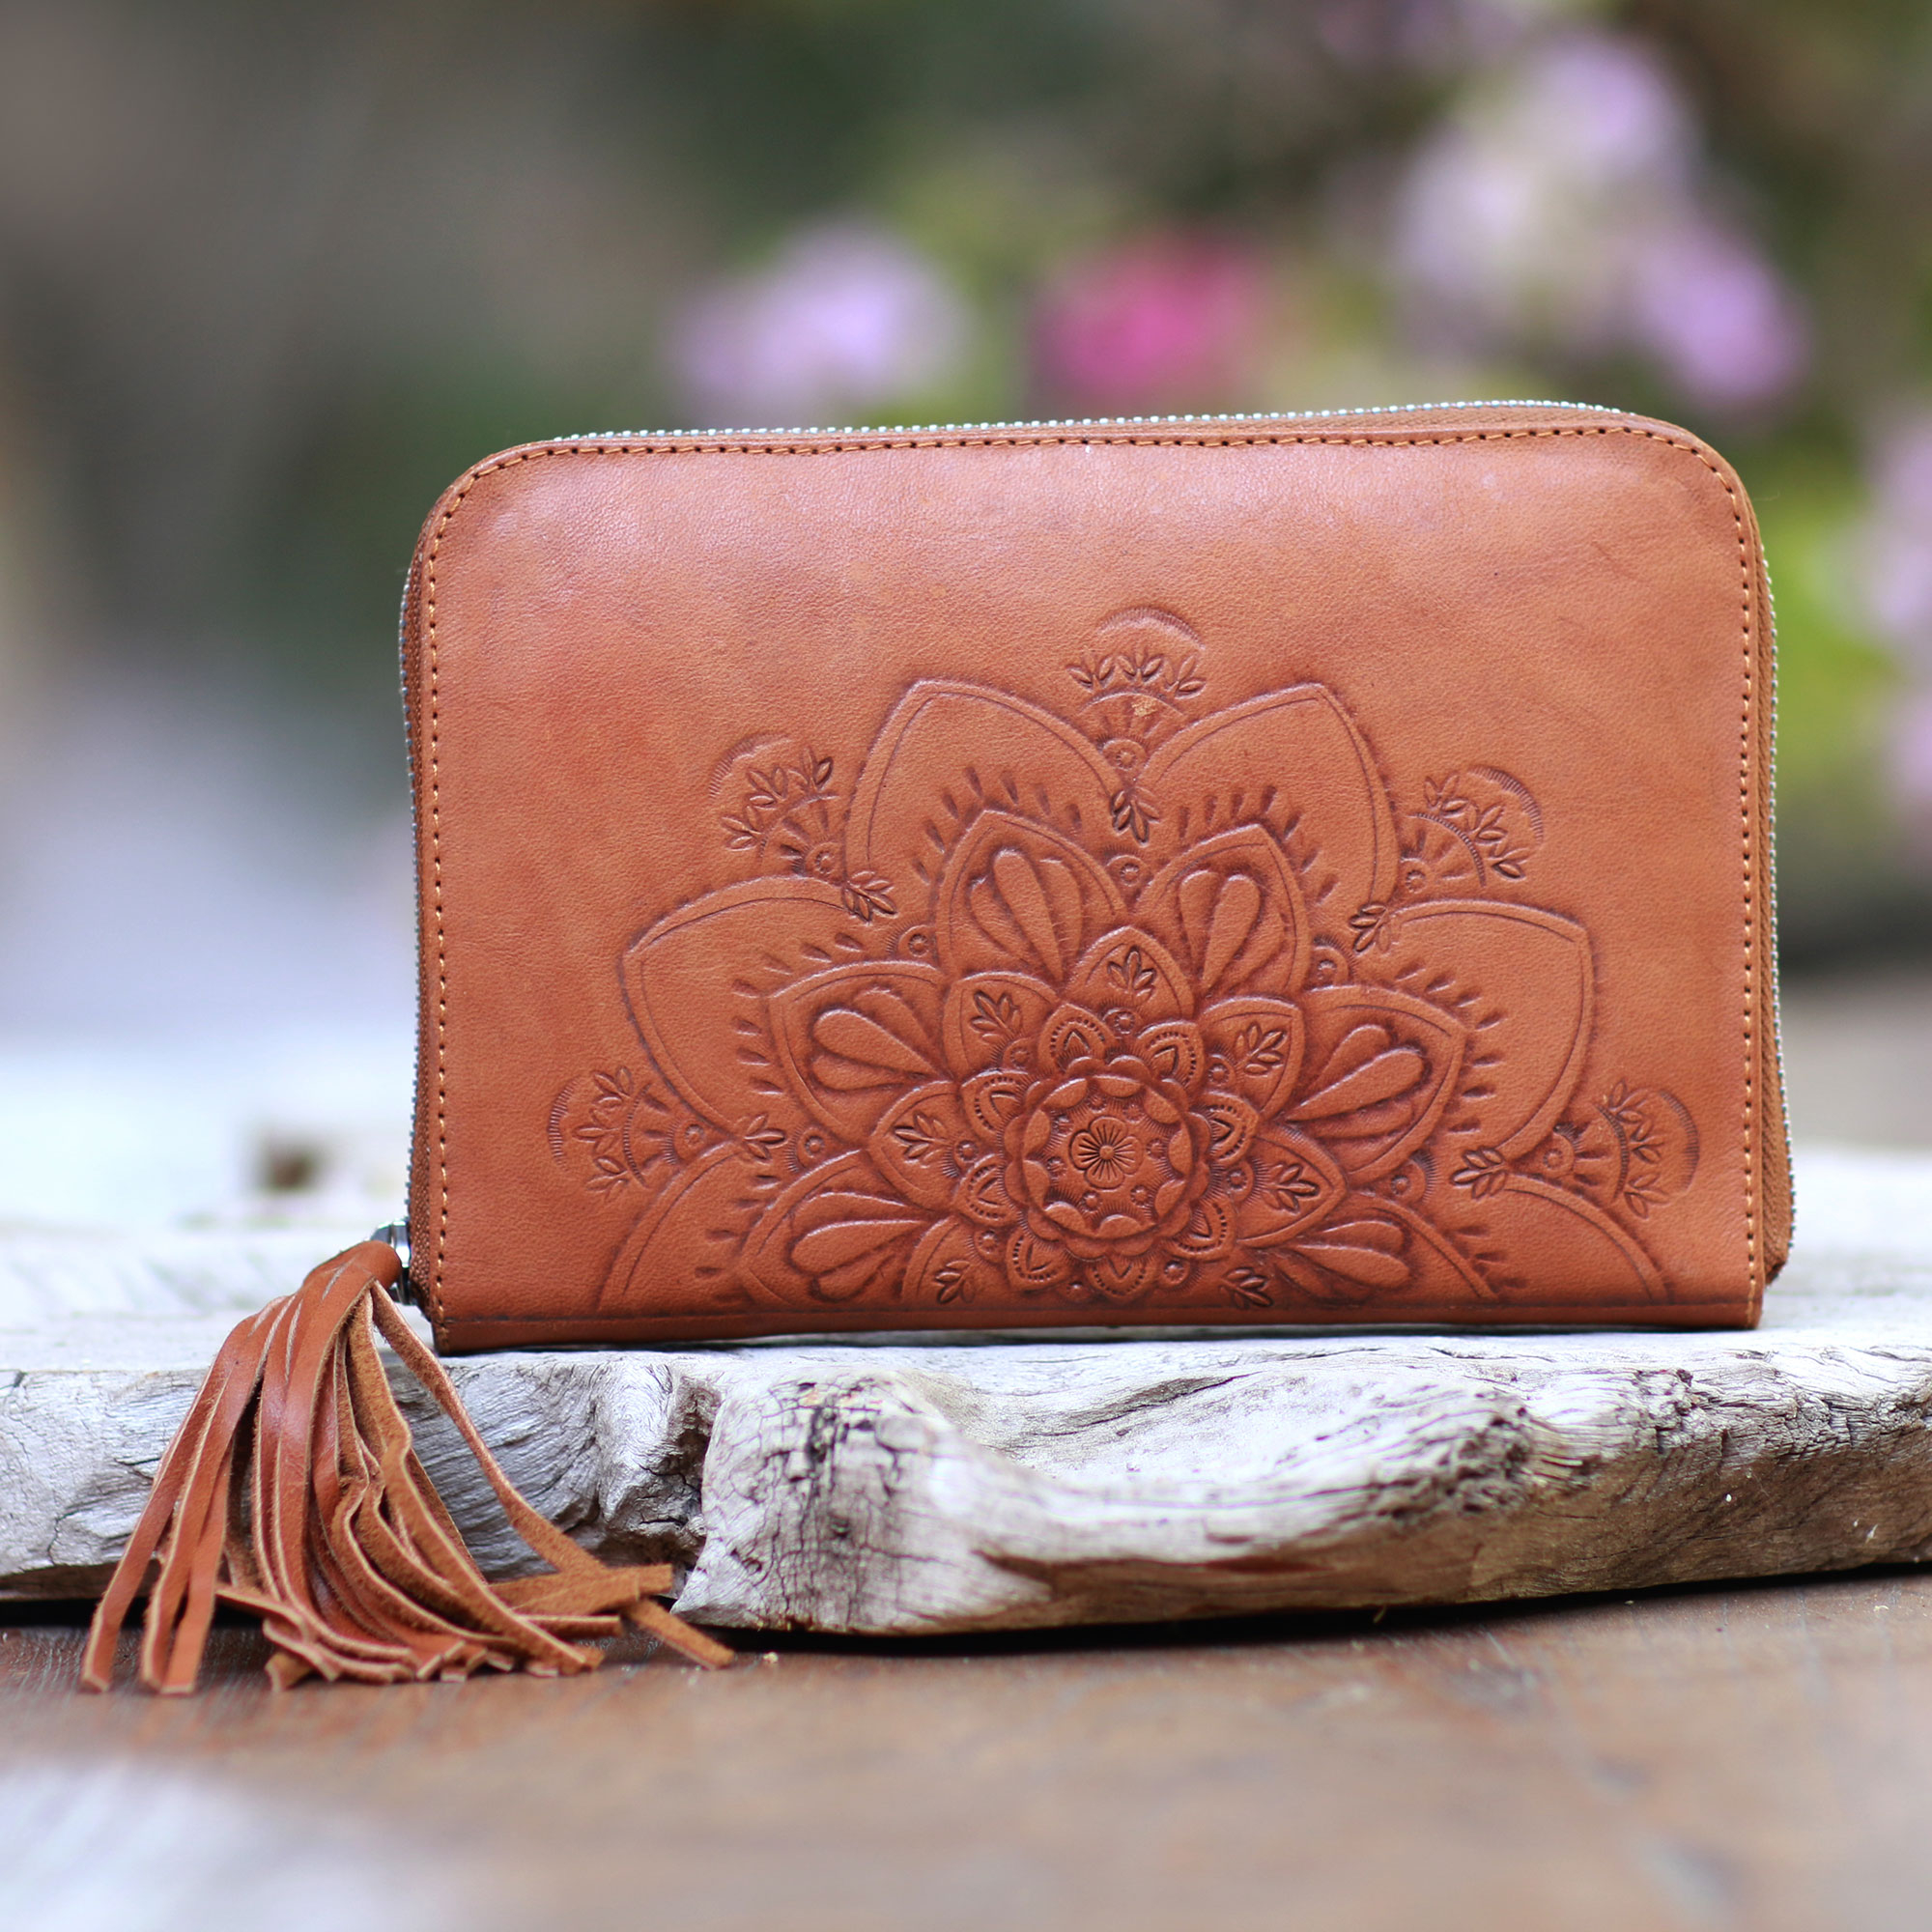 Lotus Flowers And Leaves Womens Genuine Leather Wallet Zip Around Wallet Clutch Wallet Coin Purse 